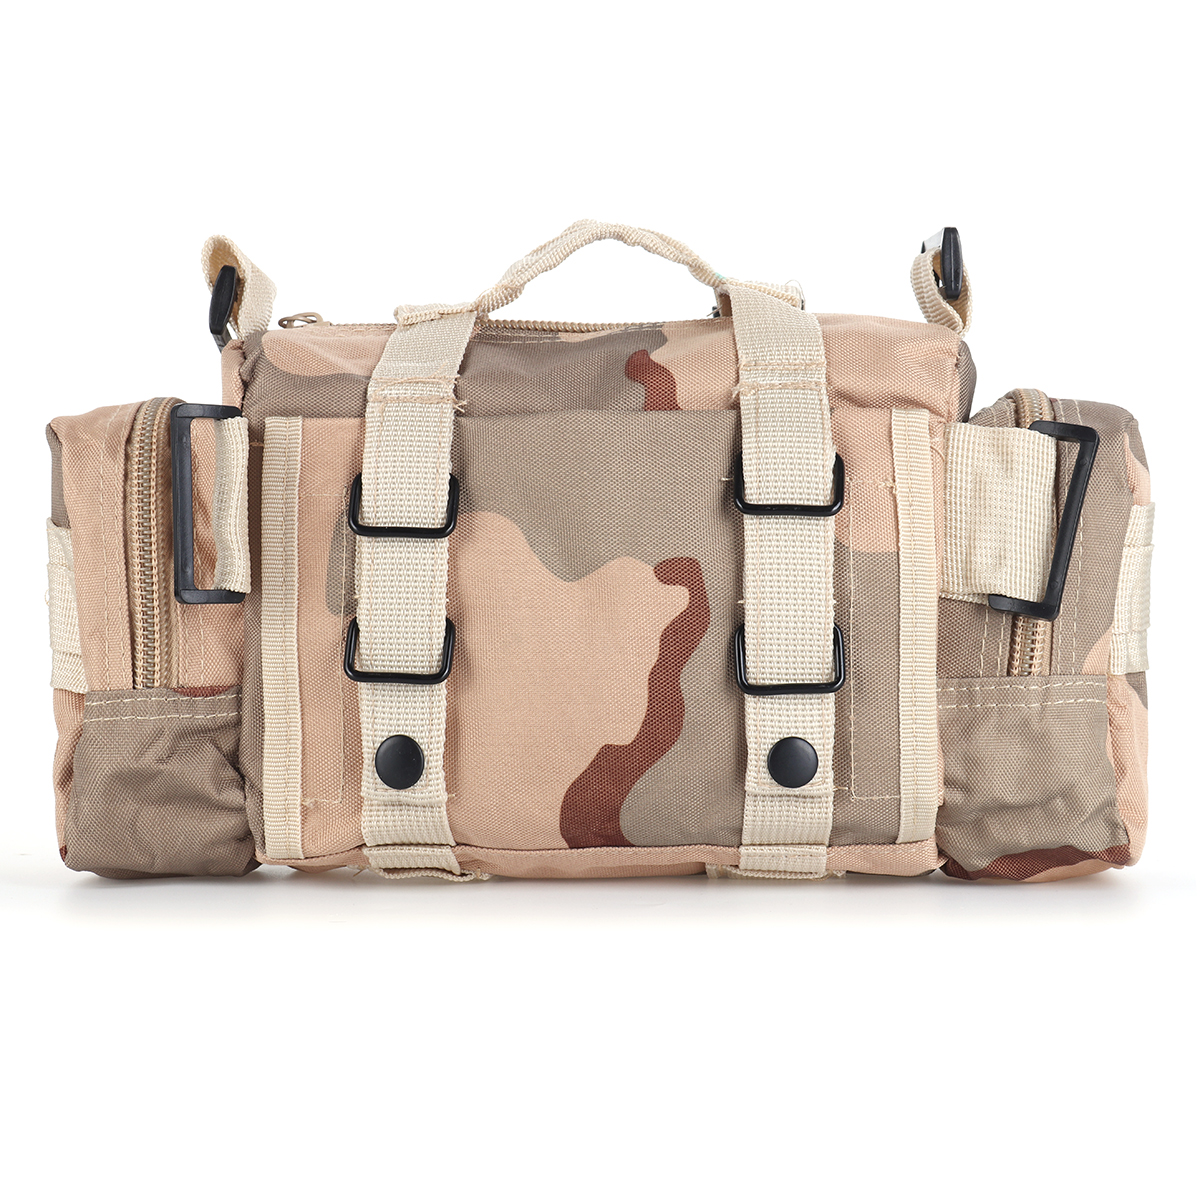 Multifunctional-Outdoor-Sports-Hiking-with-Zippers-Nylon-Oxford-Cloth-Tactical-Shoulder-Bag-Waist-Pa-1825563-16